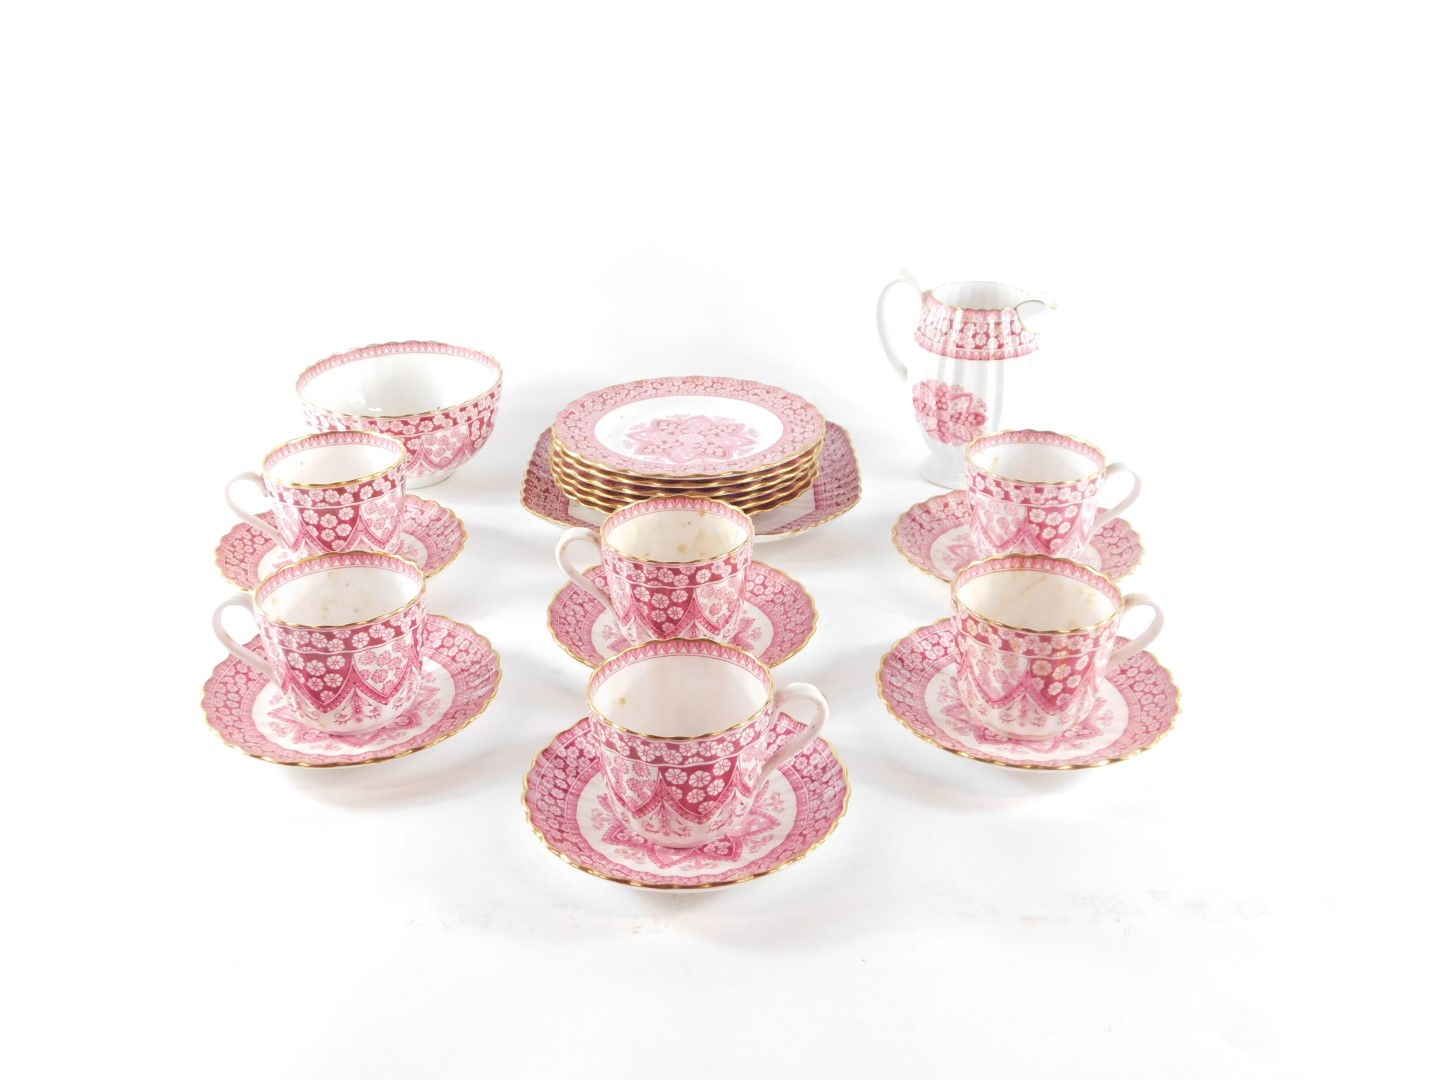 A Copeland Spode porcelain part tea service decorated in the Spode's Primrose pattern, pattern no